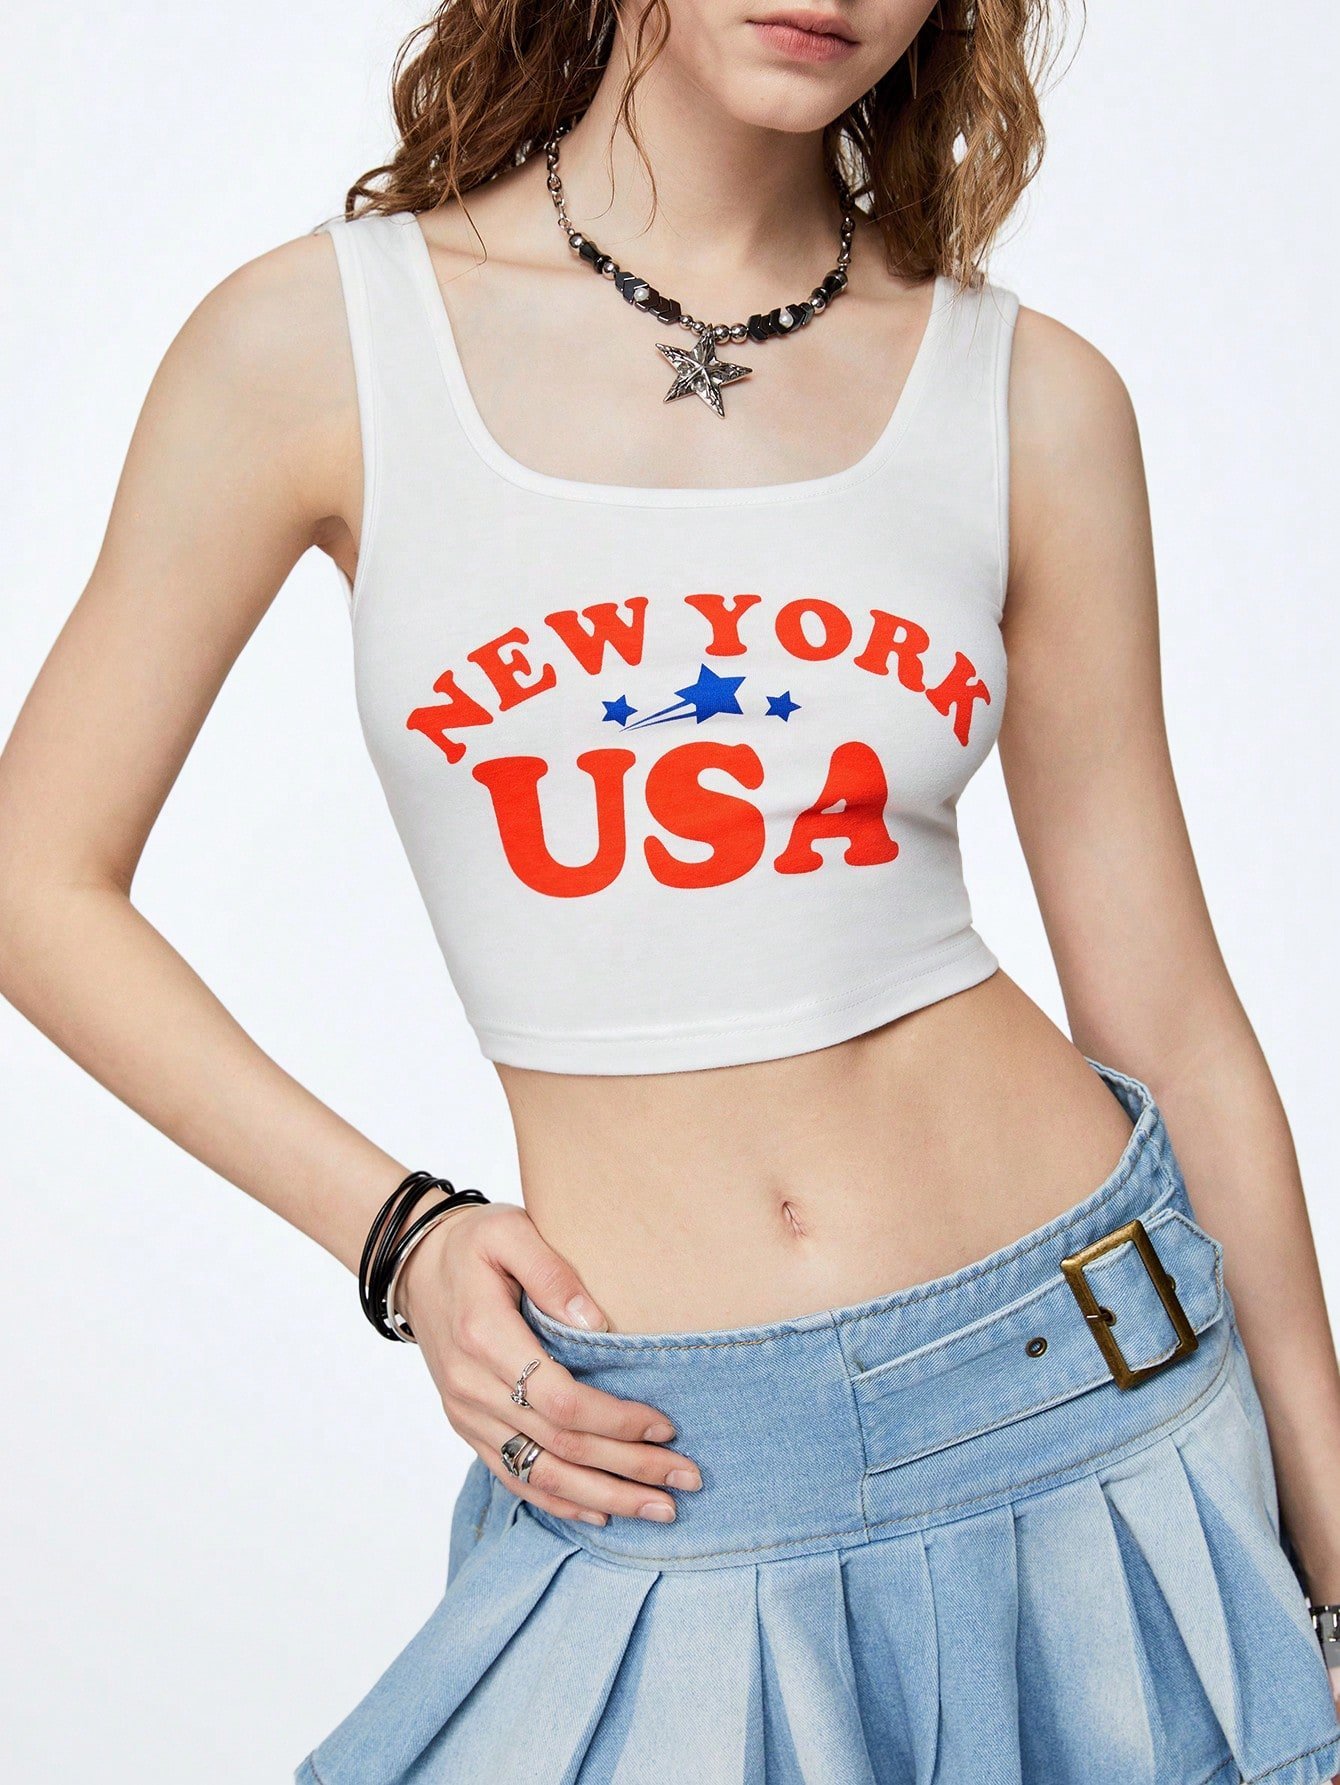 SHEIN Neu 4th Of July USA Women's Independence Dayスローガンベスト